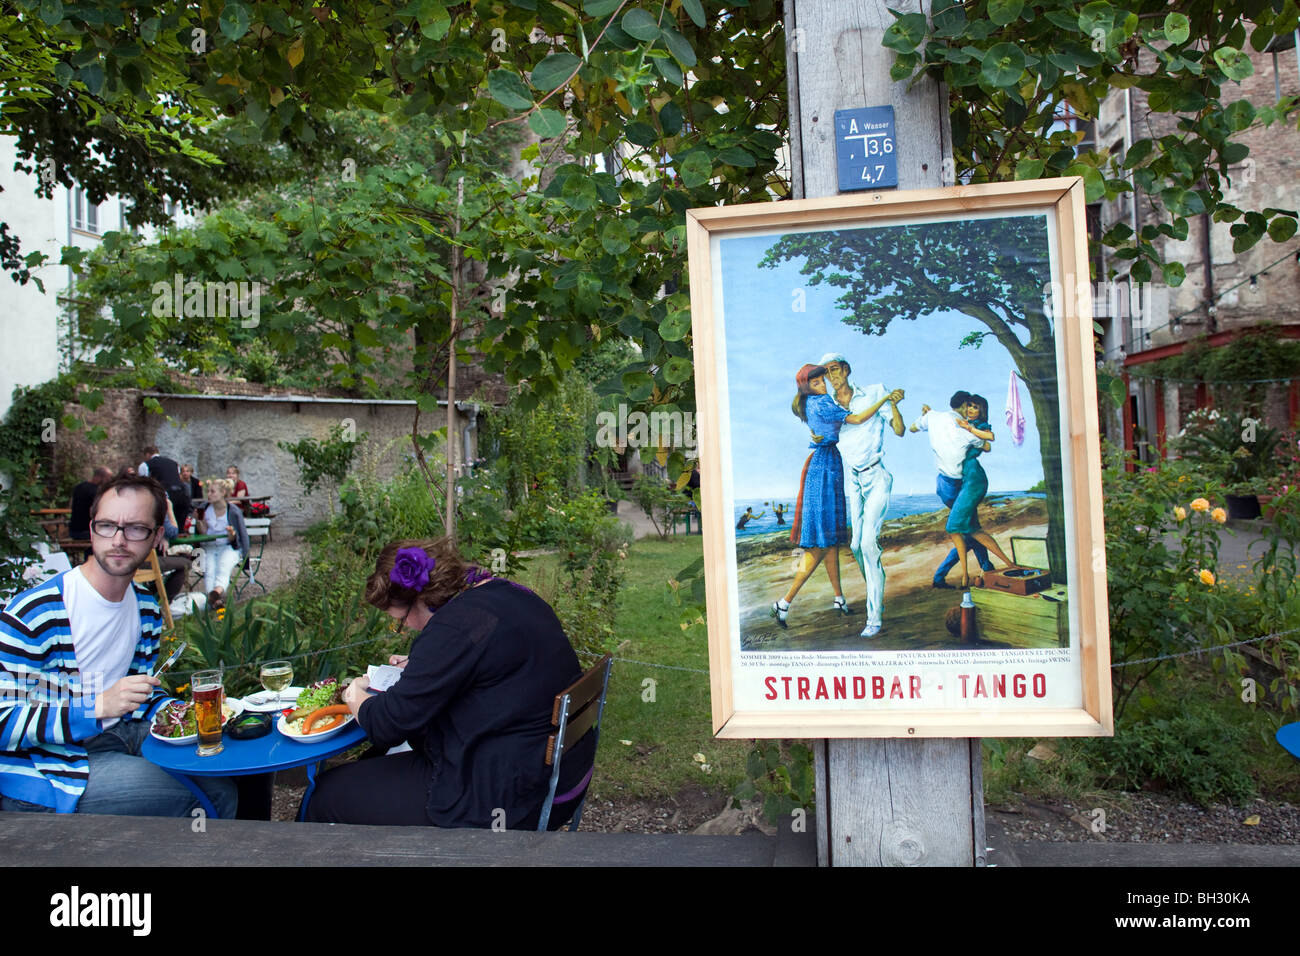 Open air restaurant on Auguststrasse, Berlin, Germany Stock Photo